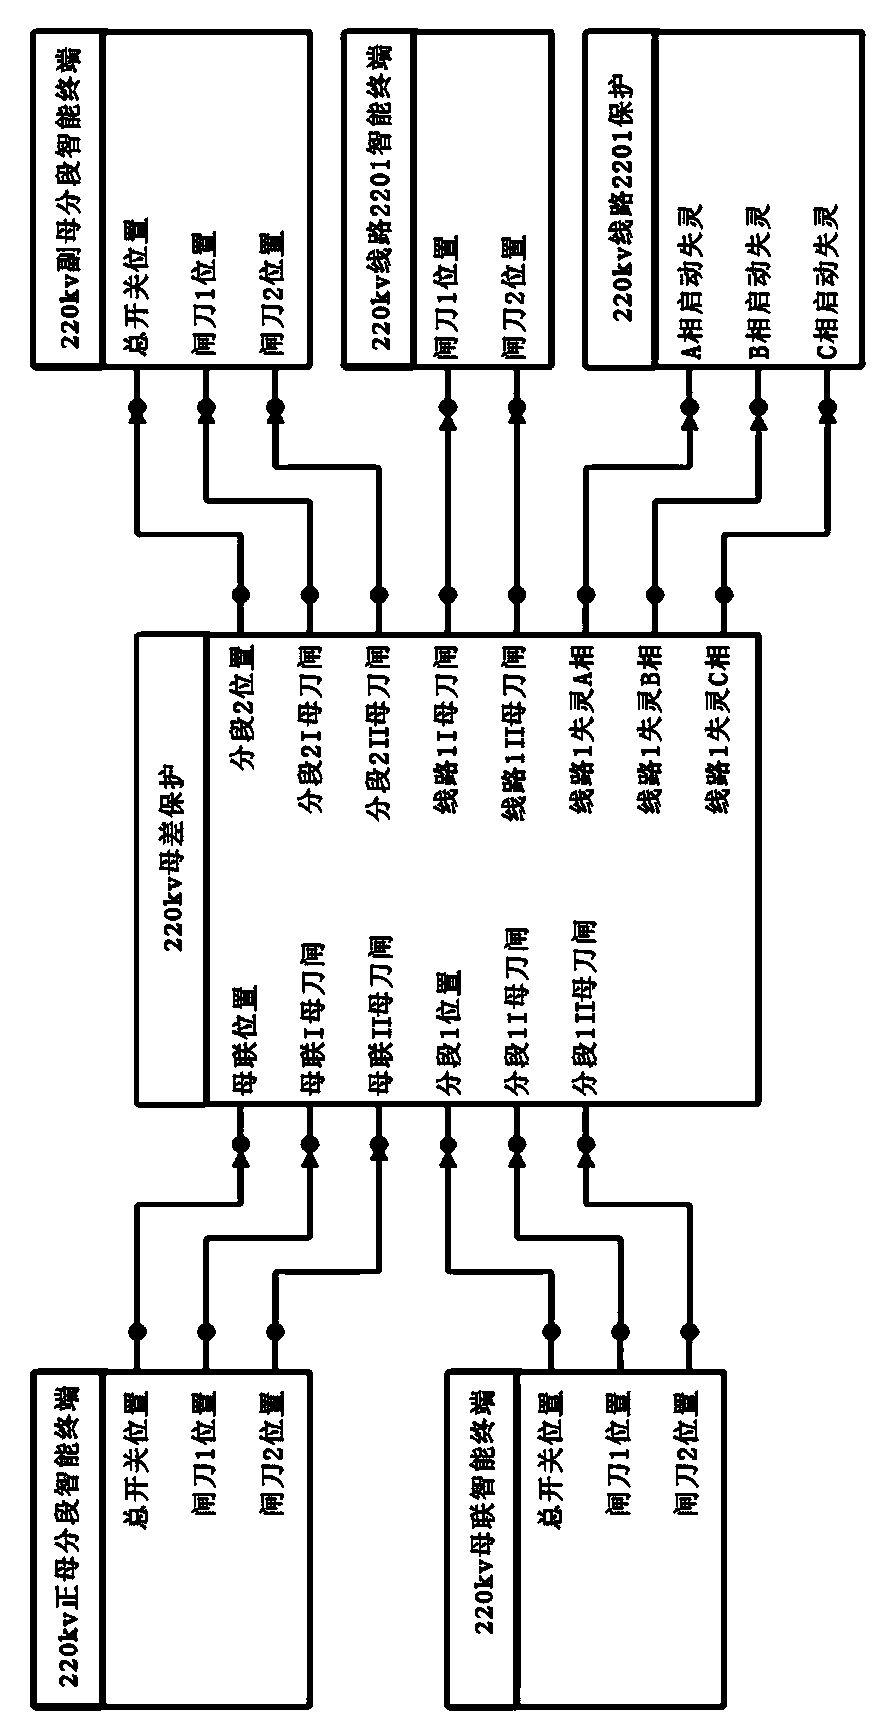 Virtual terminal connection imaging method based on security coding device (SCD) document